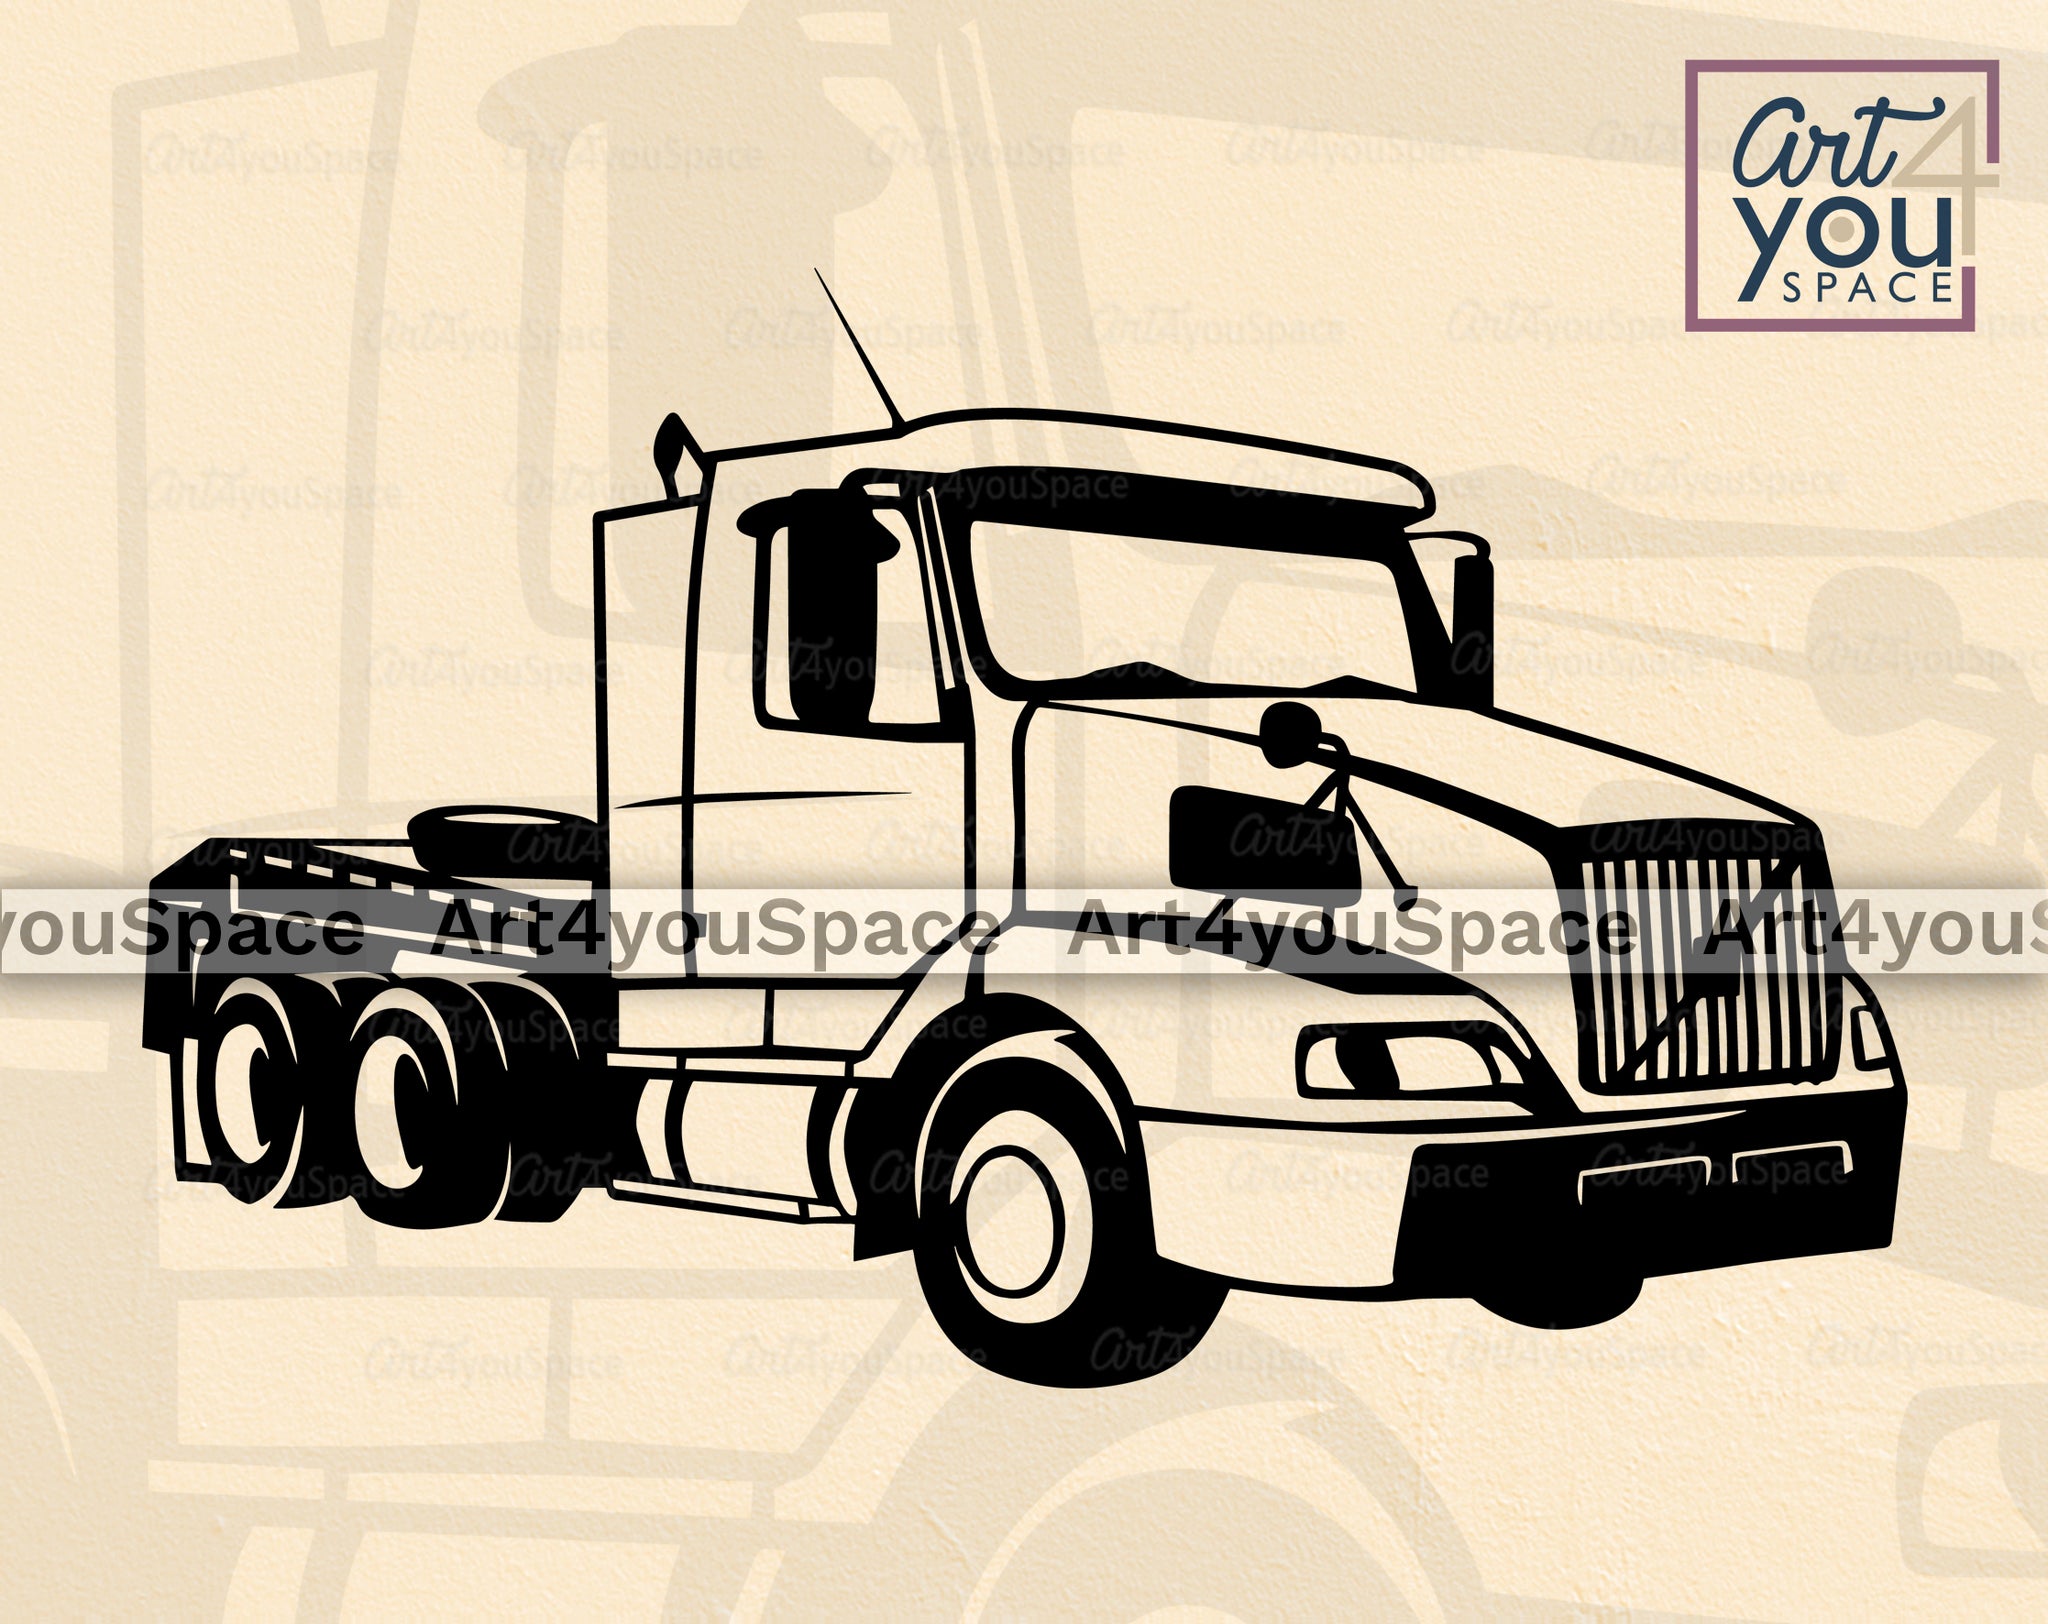 truck clipart black and white